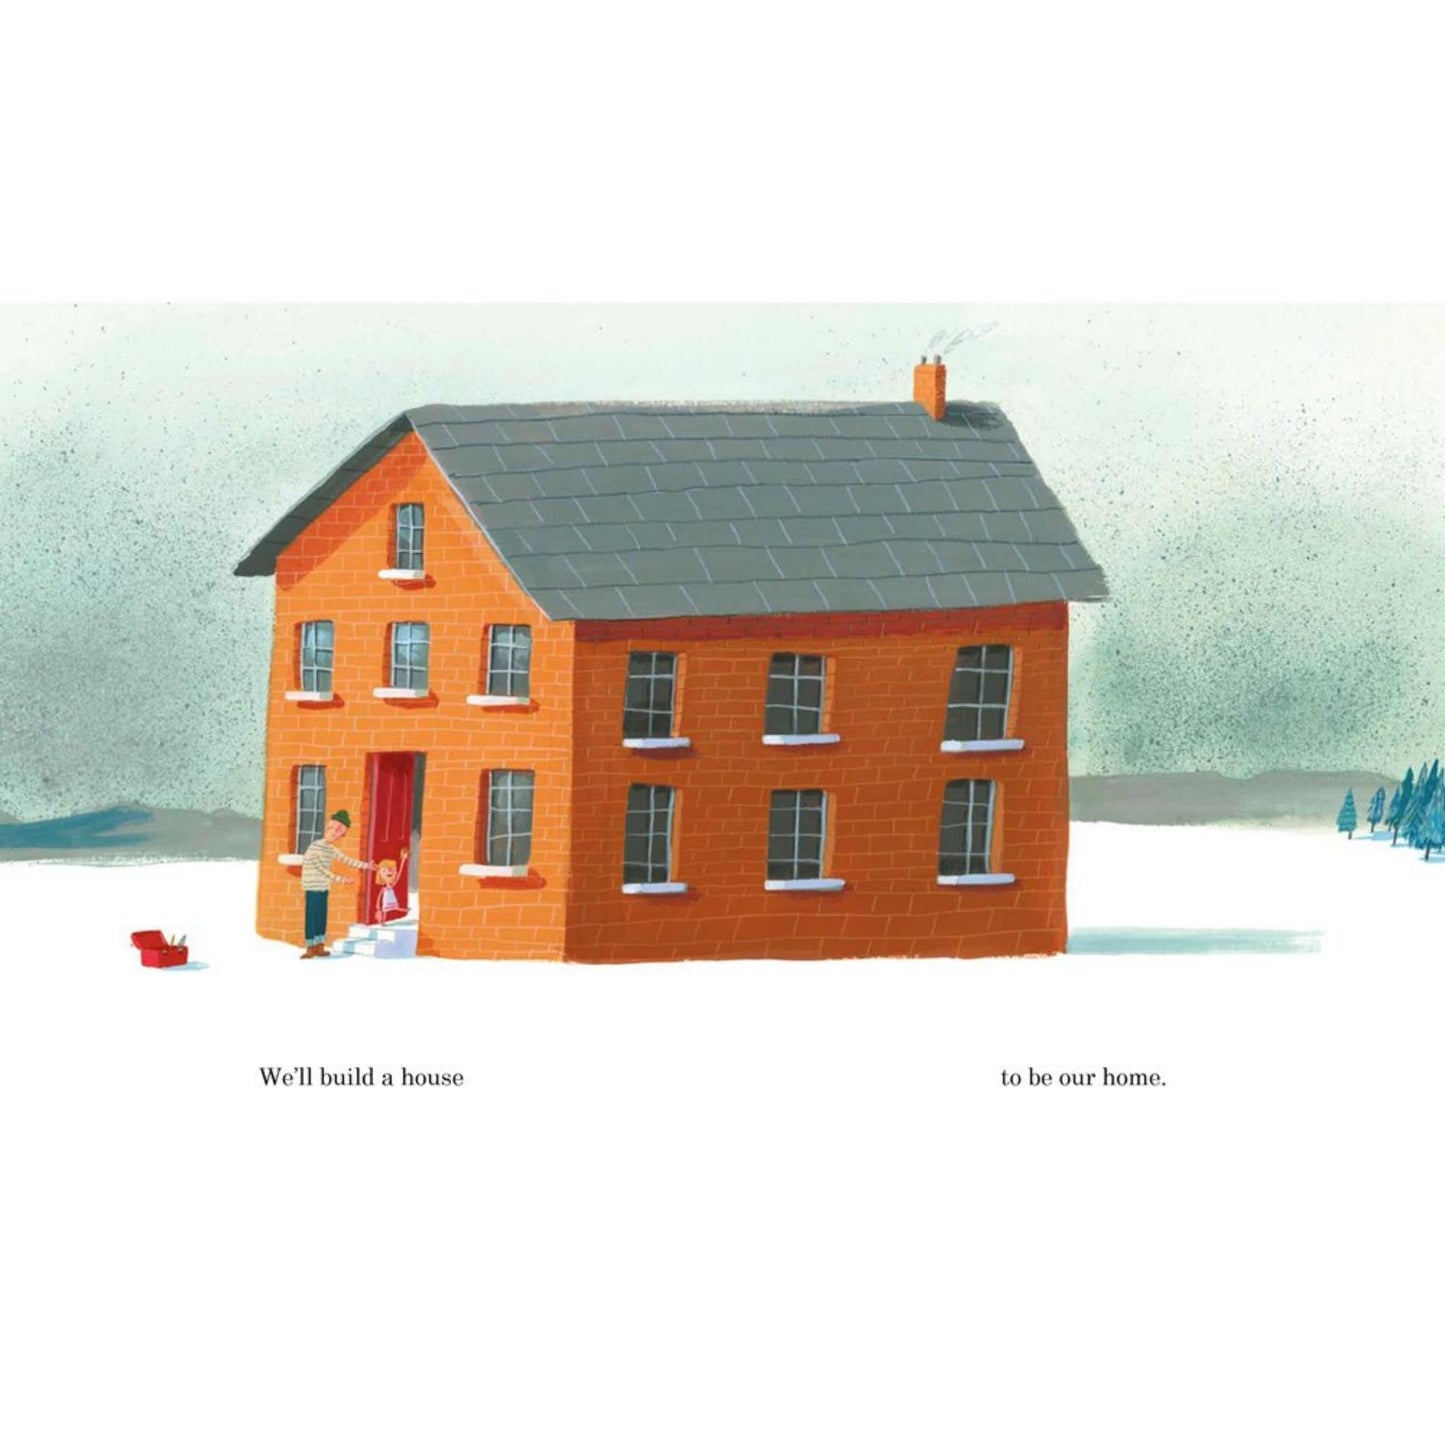 What We’ll Build - Plans For Our Together Future | Children’s Book on Family